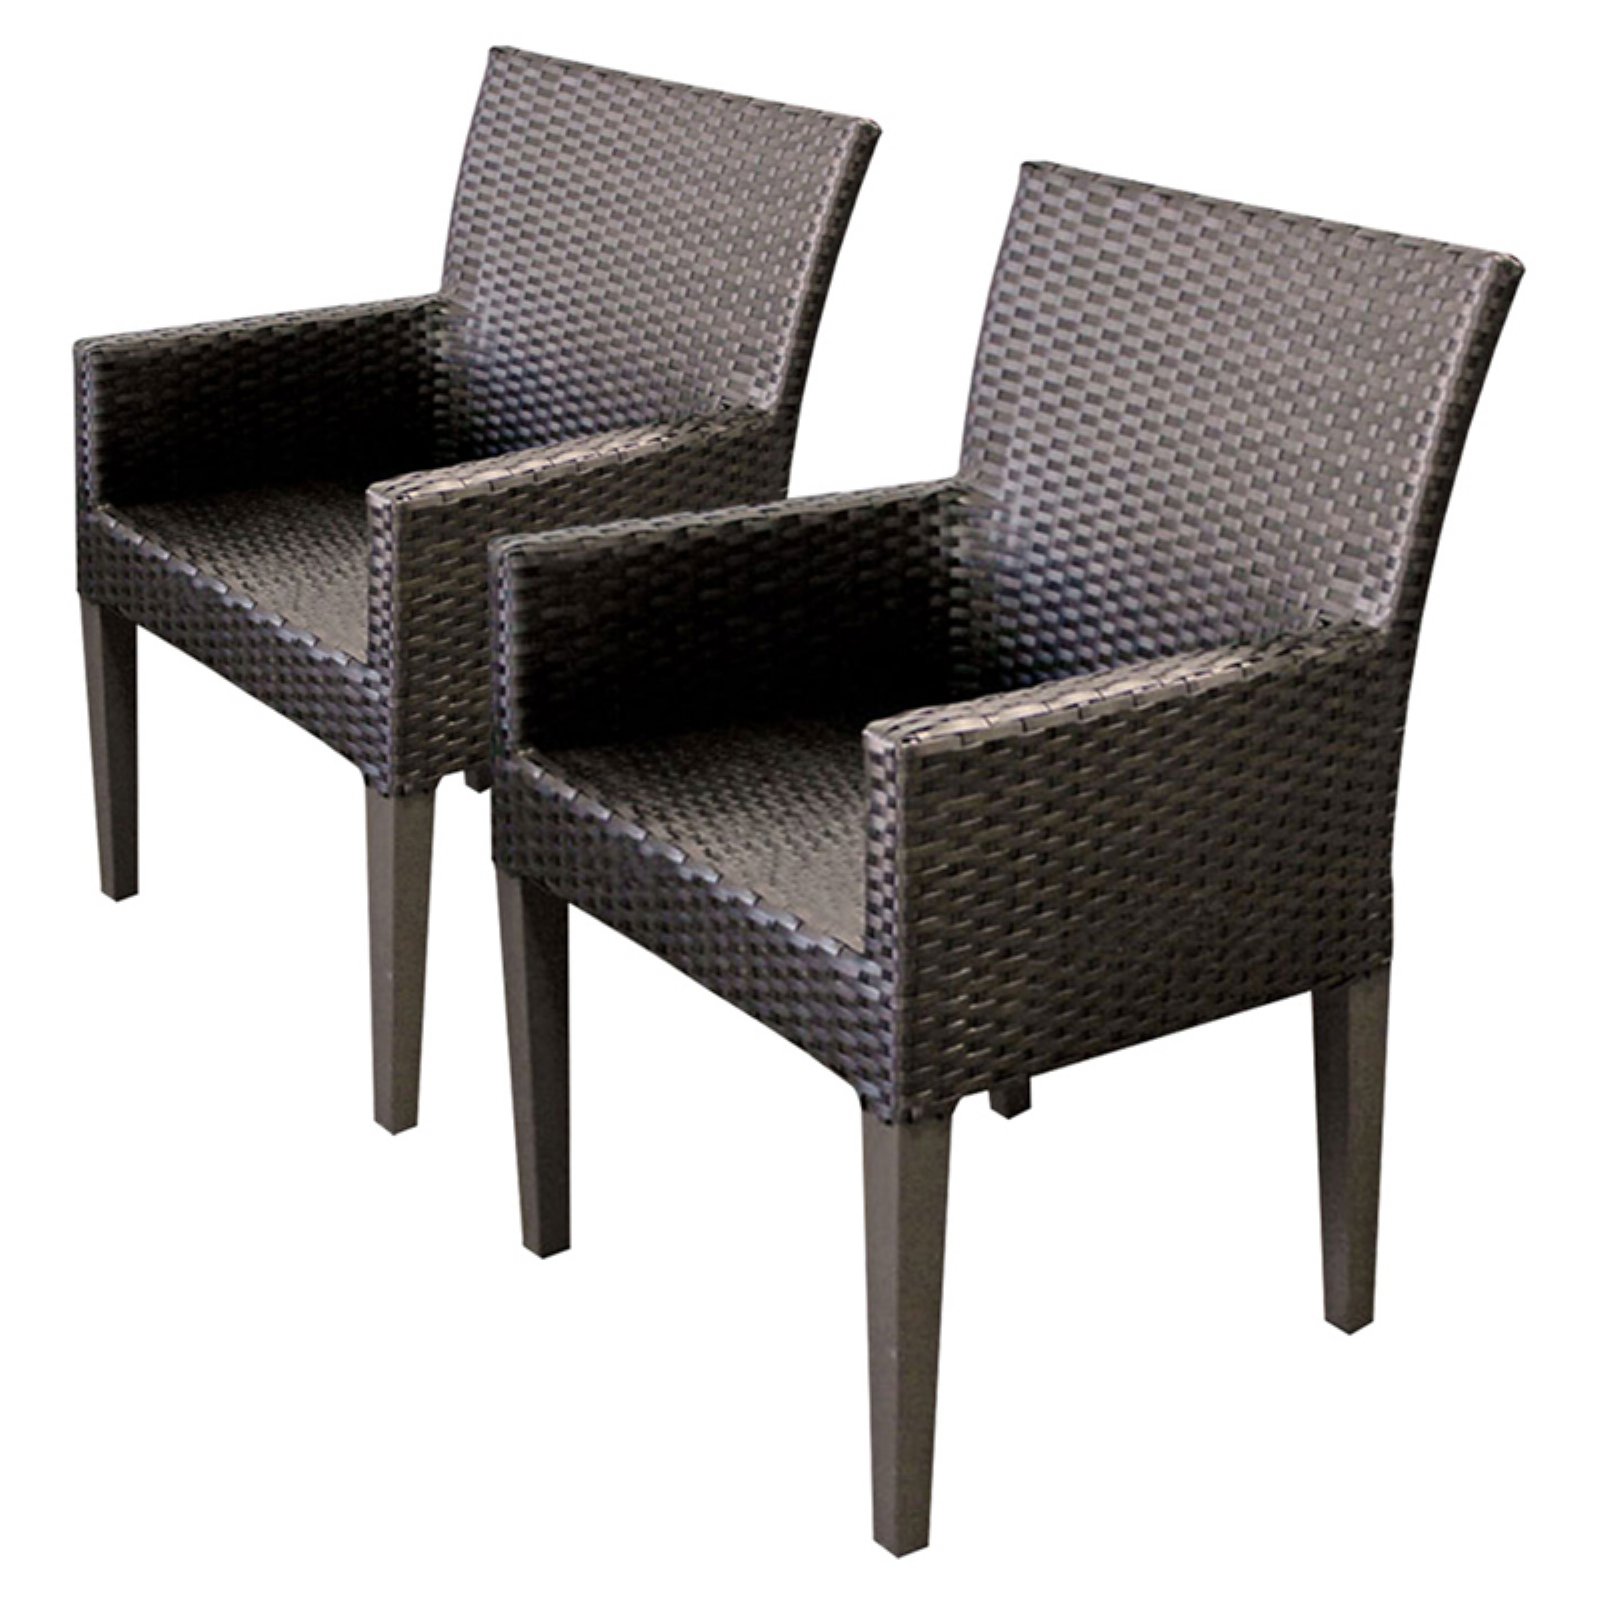 TK Classics Barbados Dining Chair with Arms and Cushion in Gray (Set of 2) - image 2 of 2